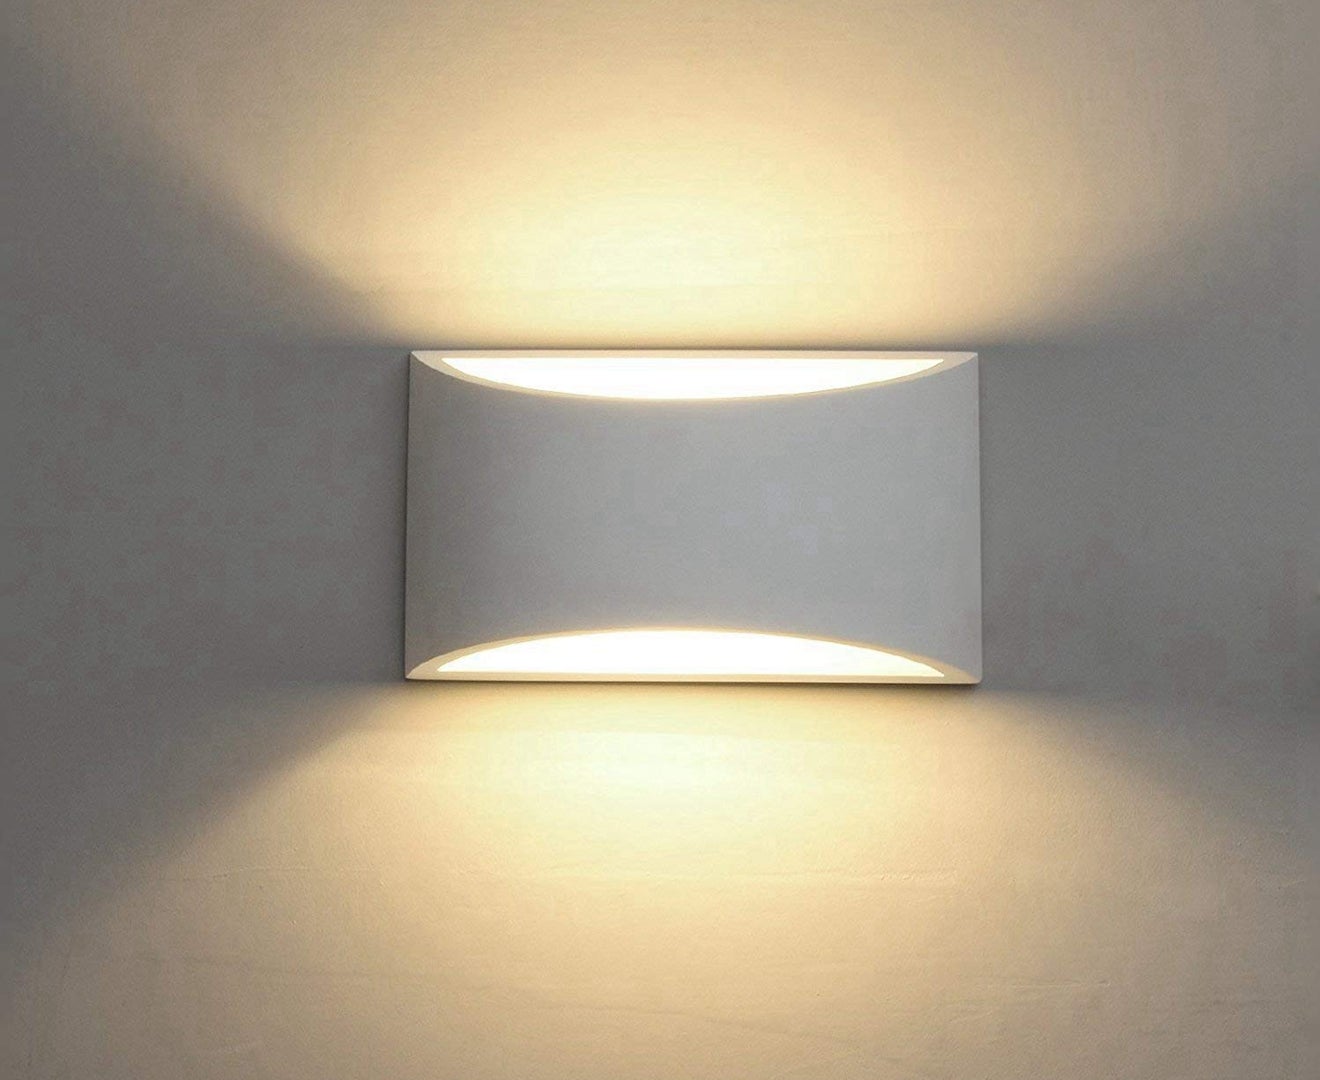 2 Pcs Aluminum Wall Lamp Up Down Design,Warm White 3000K Wall Sconce Lighting Fixtures for Living Room Bedroom Bathroom Kitchen Dining Room 7W Modern Led Wall Light Indoor 